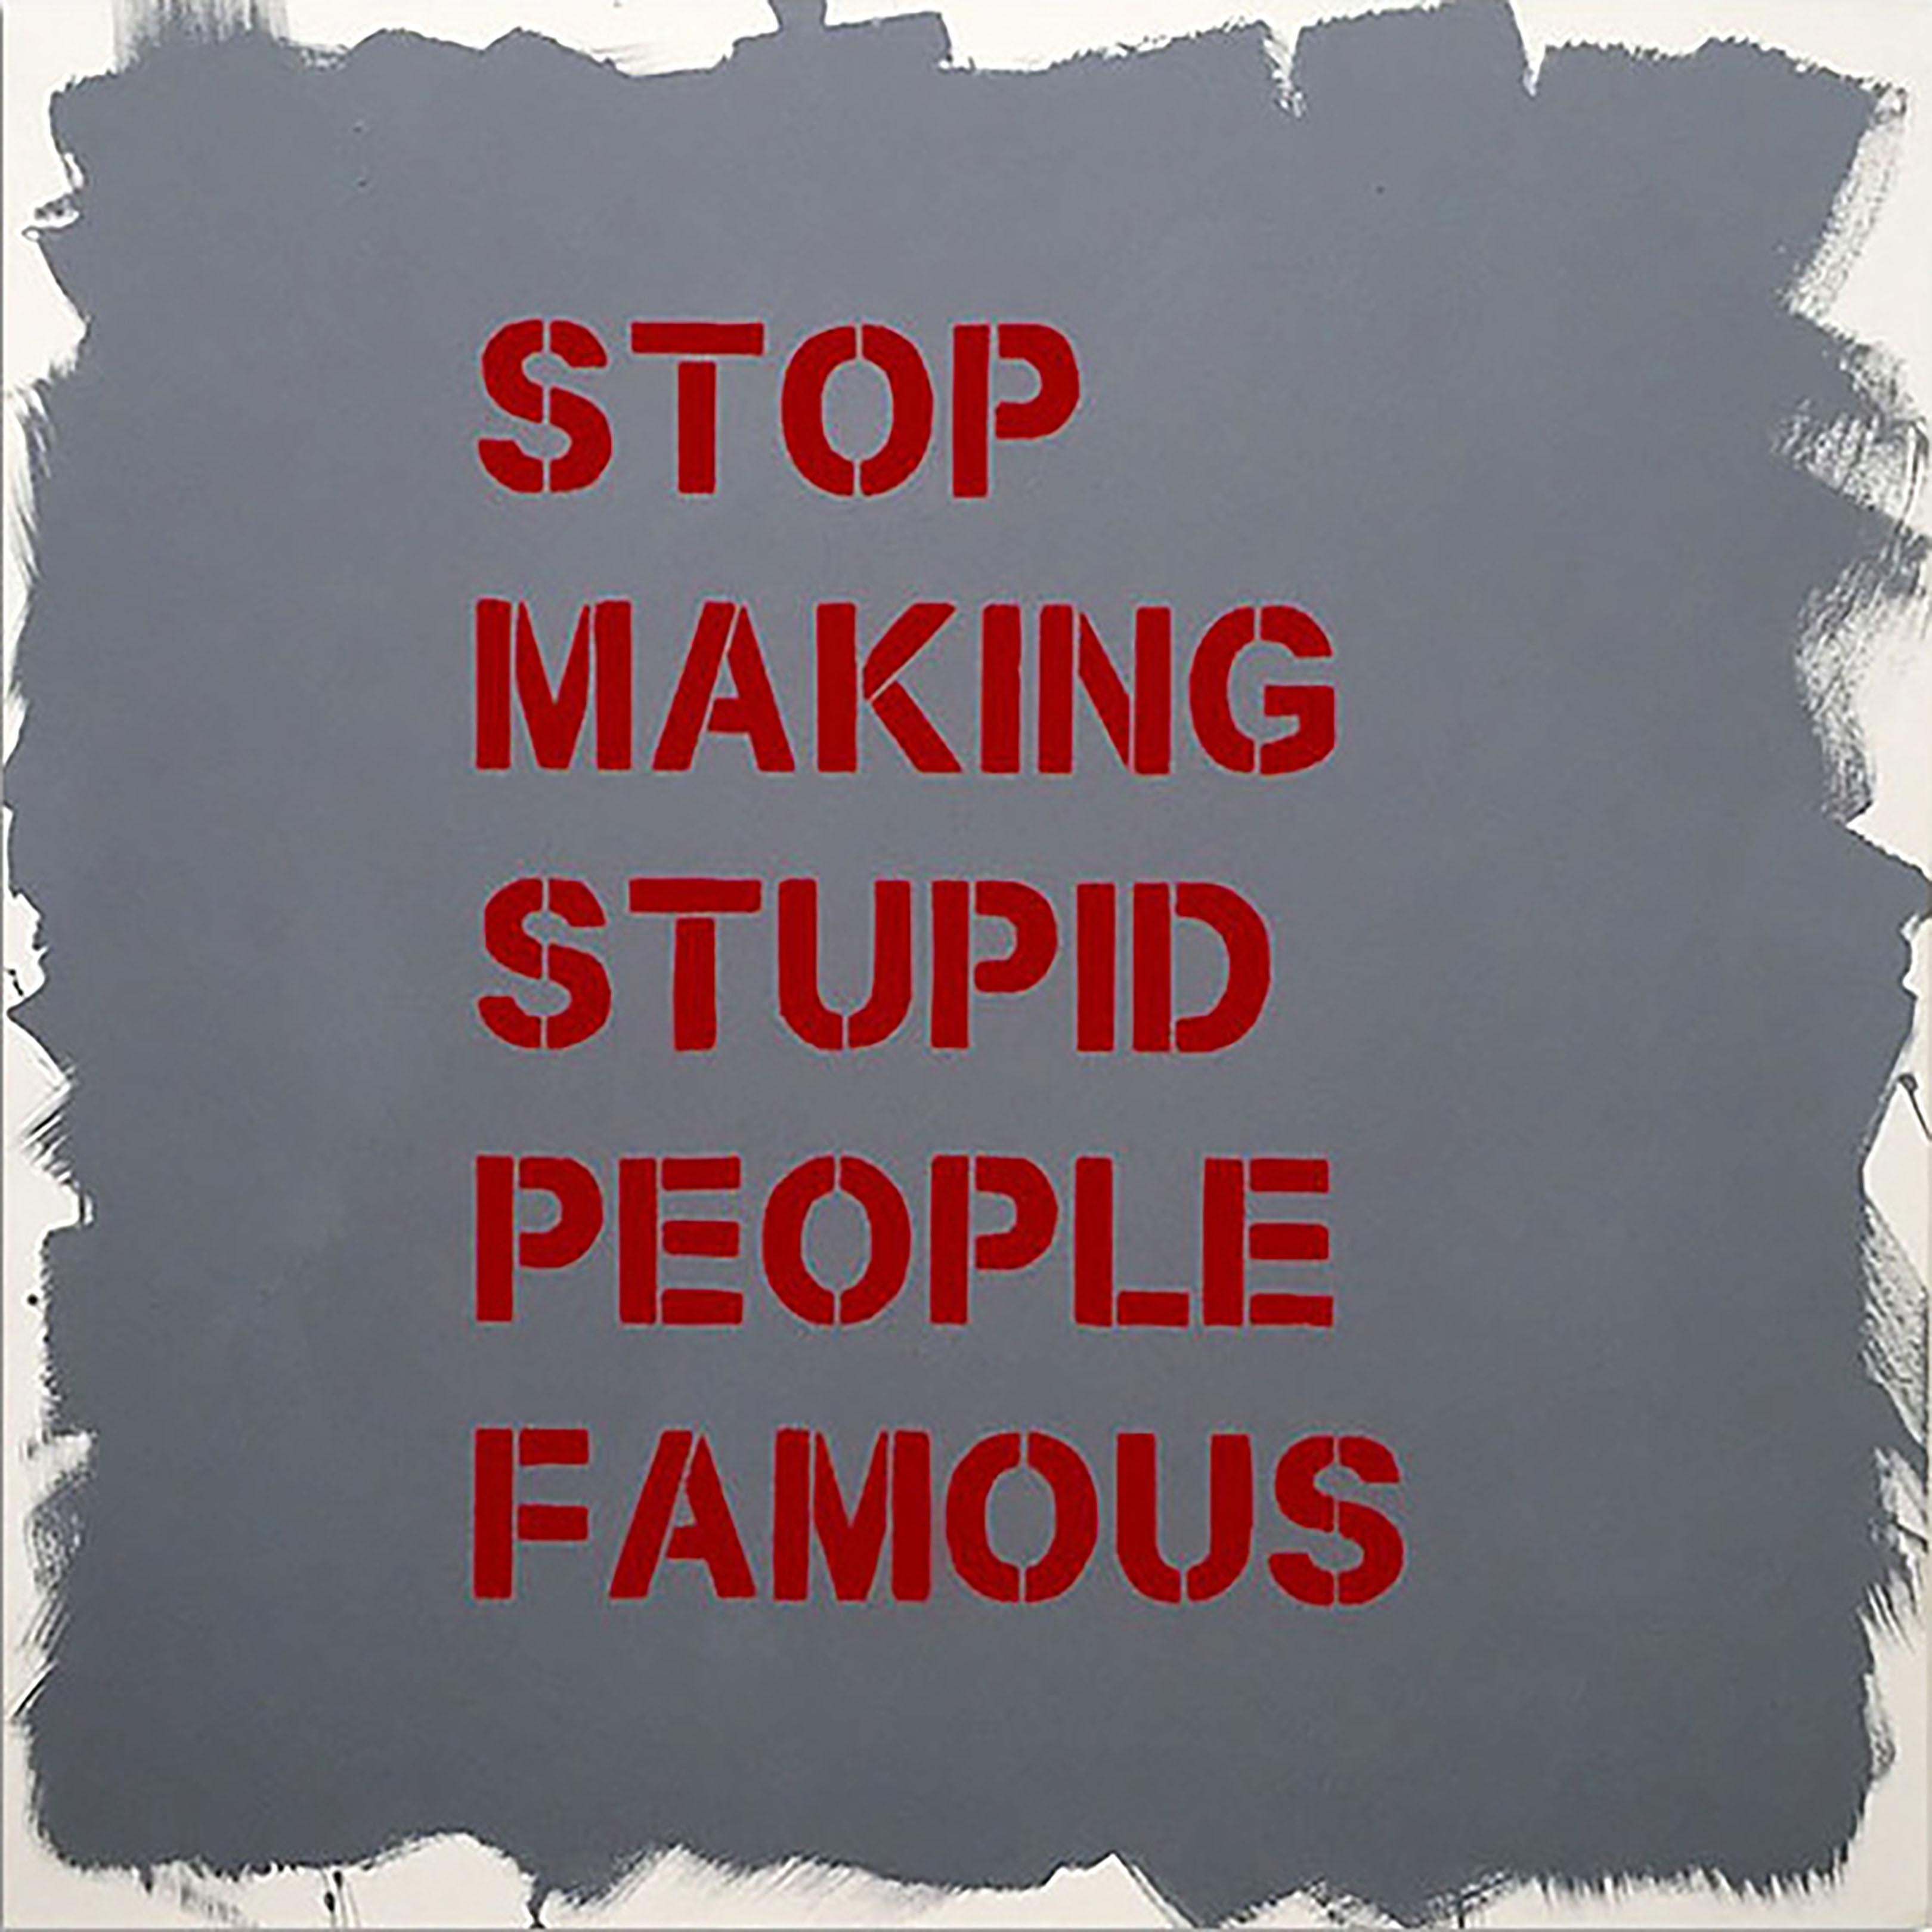 "Stop Making Stupid People Famous" - Acrylic Screen Print on Paper - Painting by Plastic Jesus